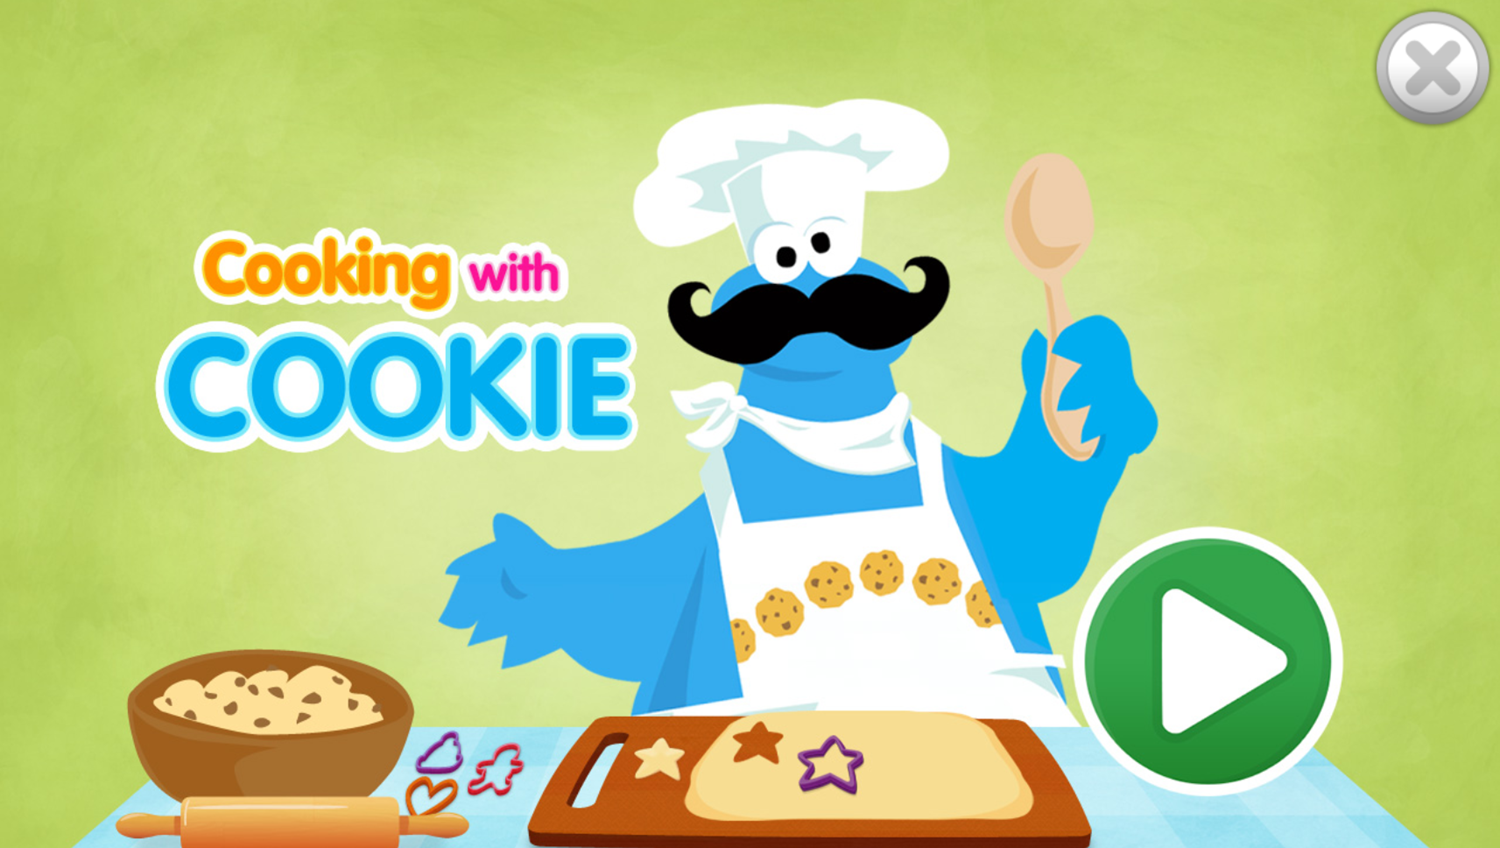 Sesame Street Cooking With Cookie Game Welcome Screen Screenshot.